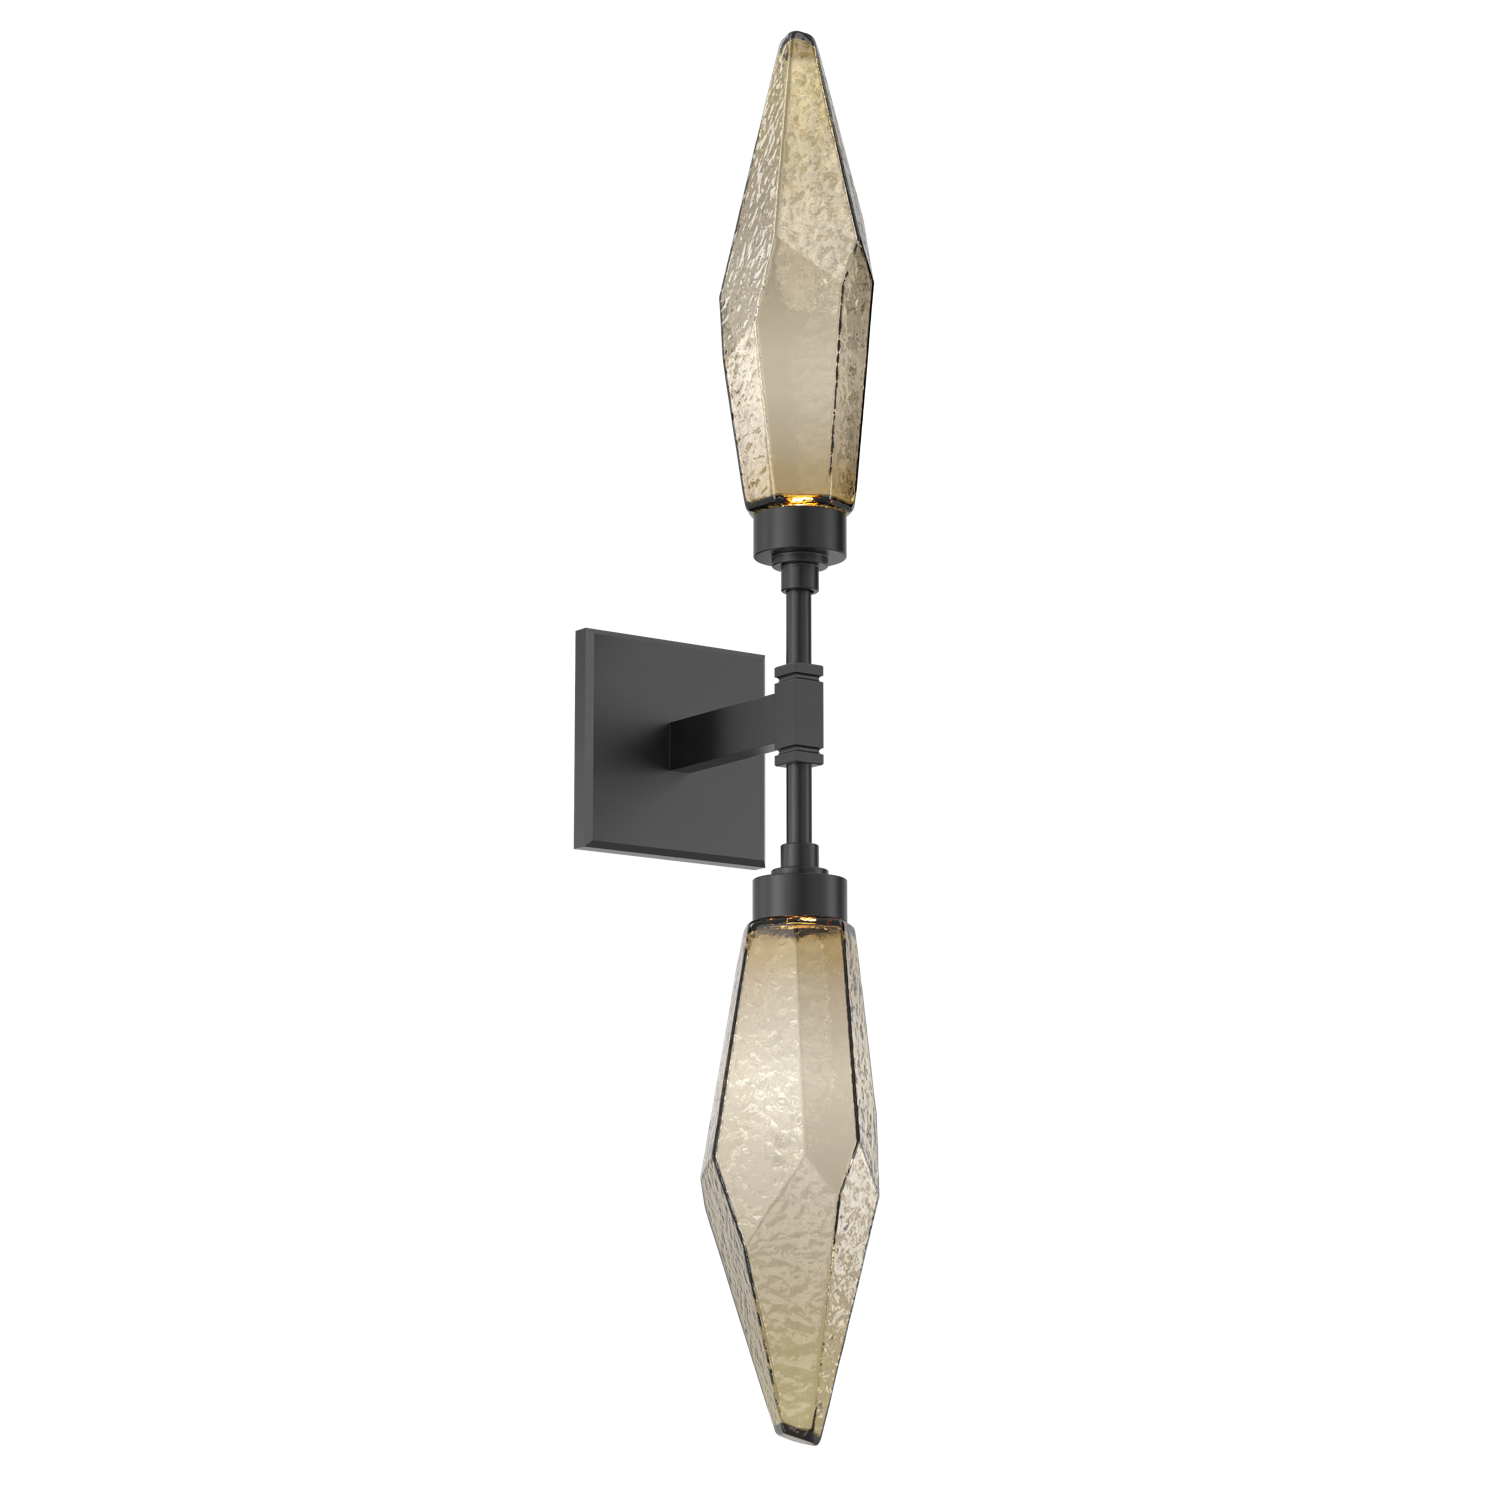 IDB0050-02-MB-CB-Hammerton-Studio-Rock-Crystal-wall-sconce-with-matte-black-finish-and-chilled-bronze-blown-glass-shades-and-LED-lamping